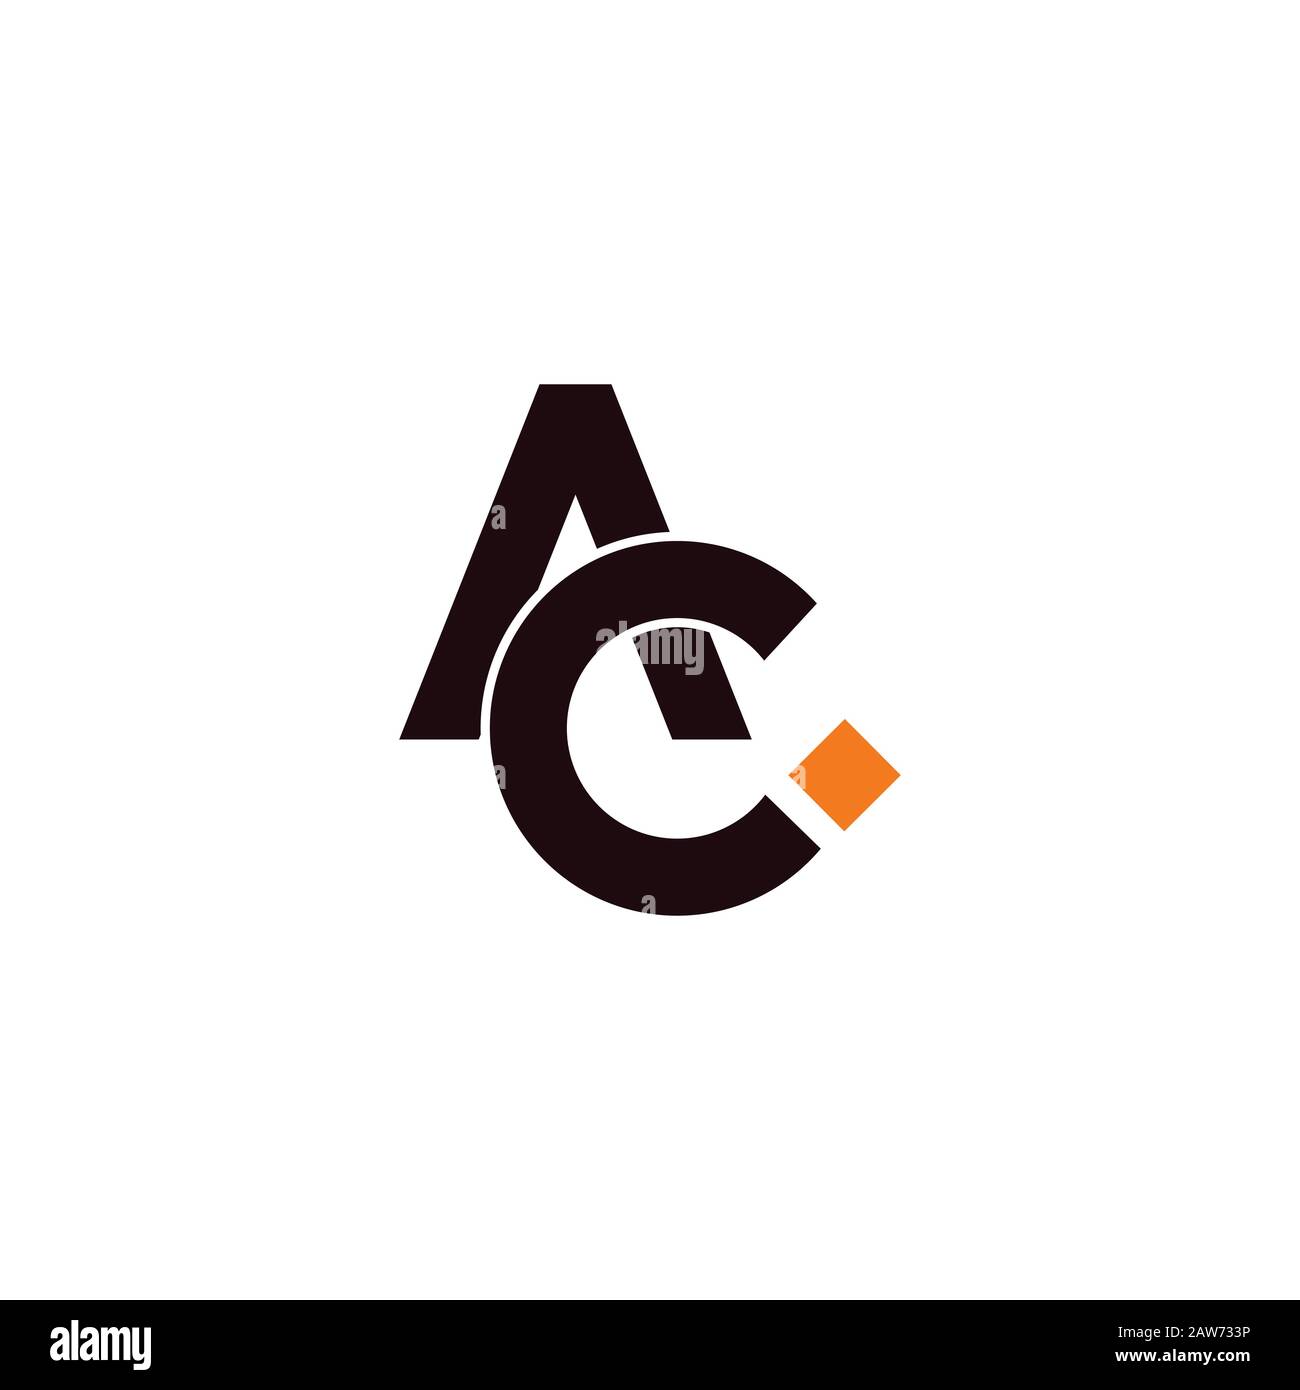 Initial letter ac or ca logo vector design template Stock Vector